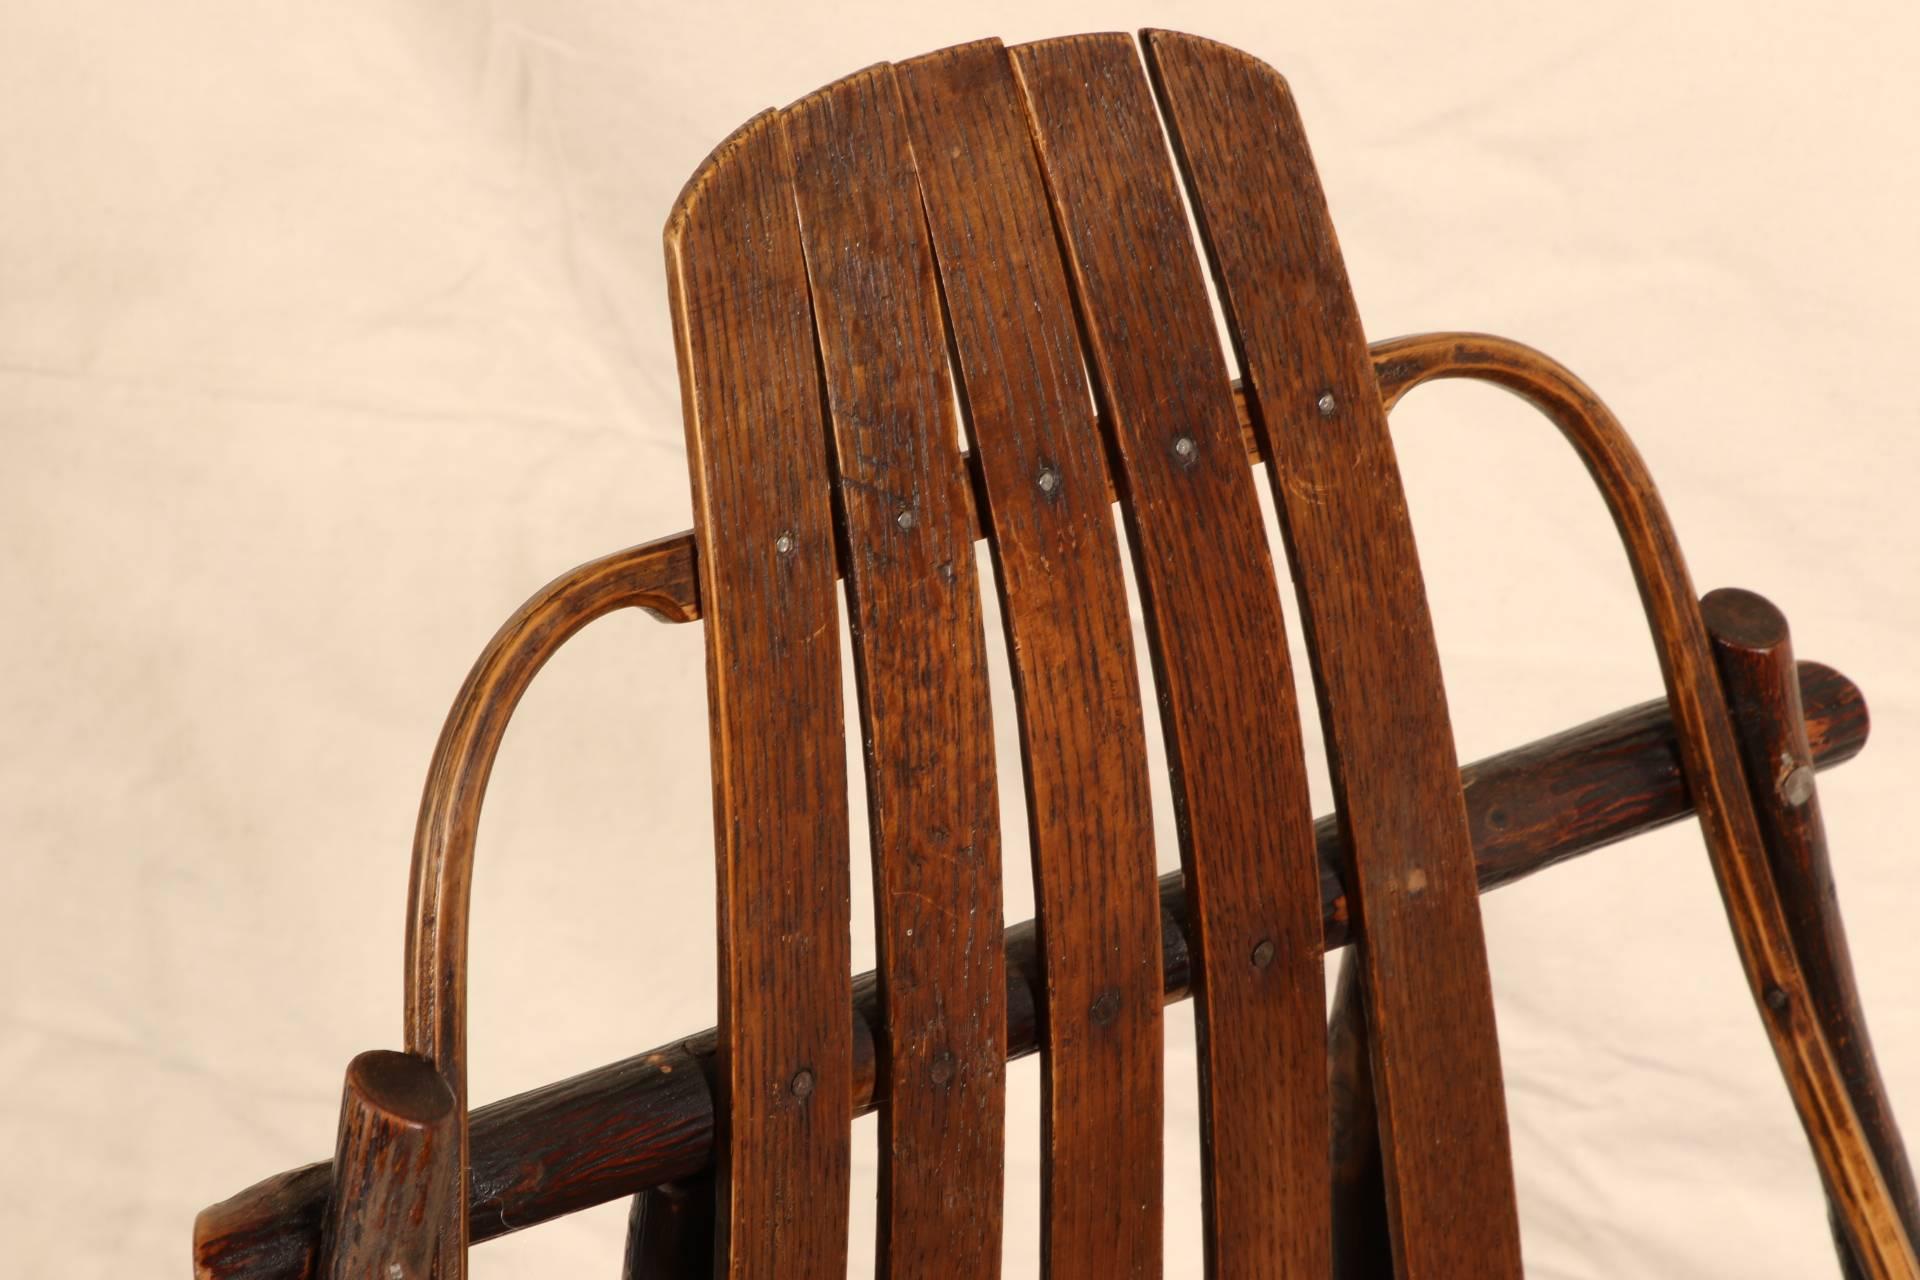 Mixed wood in a fine patina with shaped oak slat back and seat. The frame constructed of twisted and turned thin branches. Mounted on an oak rocker base. The seat rail with an incised vine motif.
Condition: Very good with age/wear consistent with